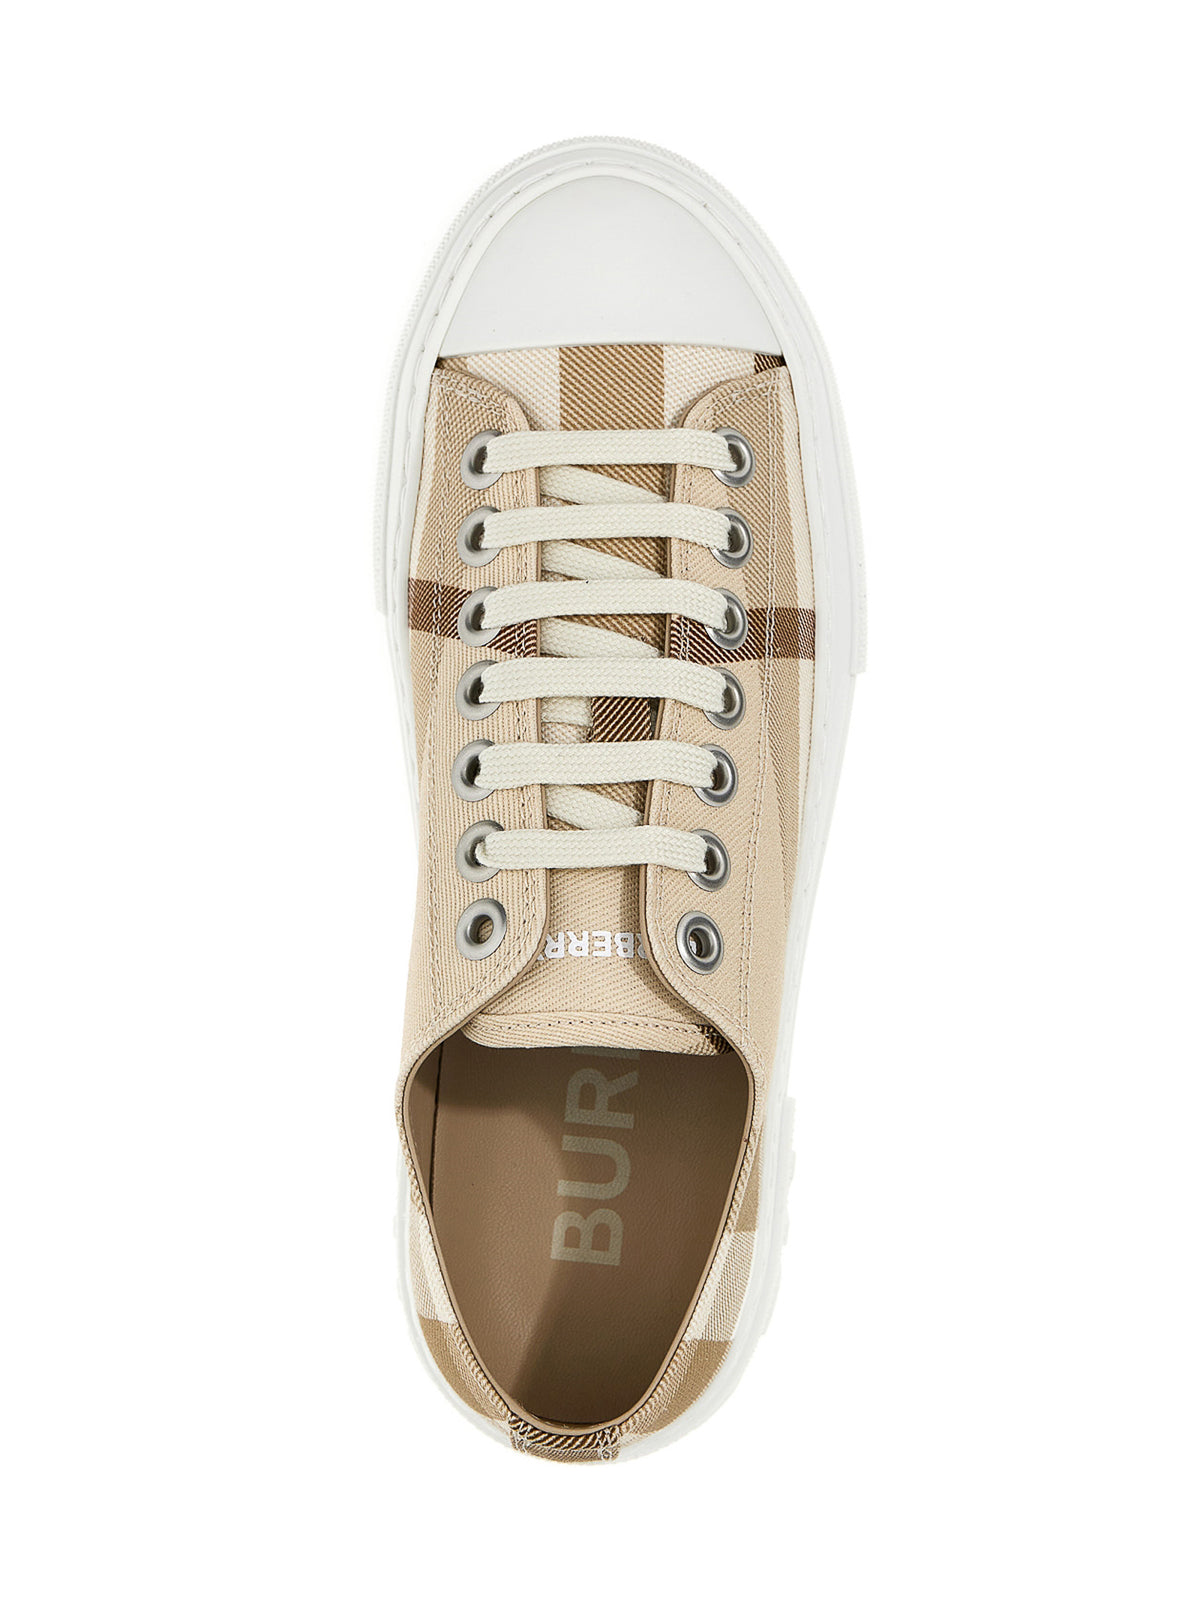 Burberry Beige Check-Print Sneakers